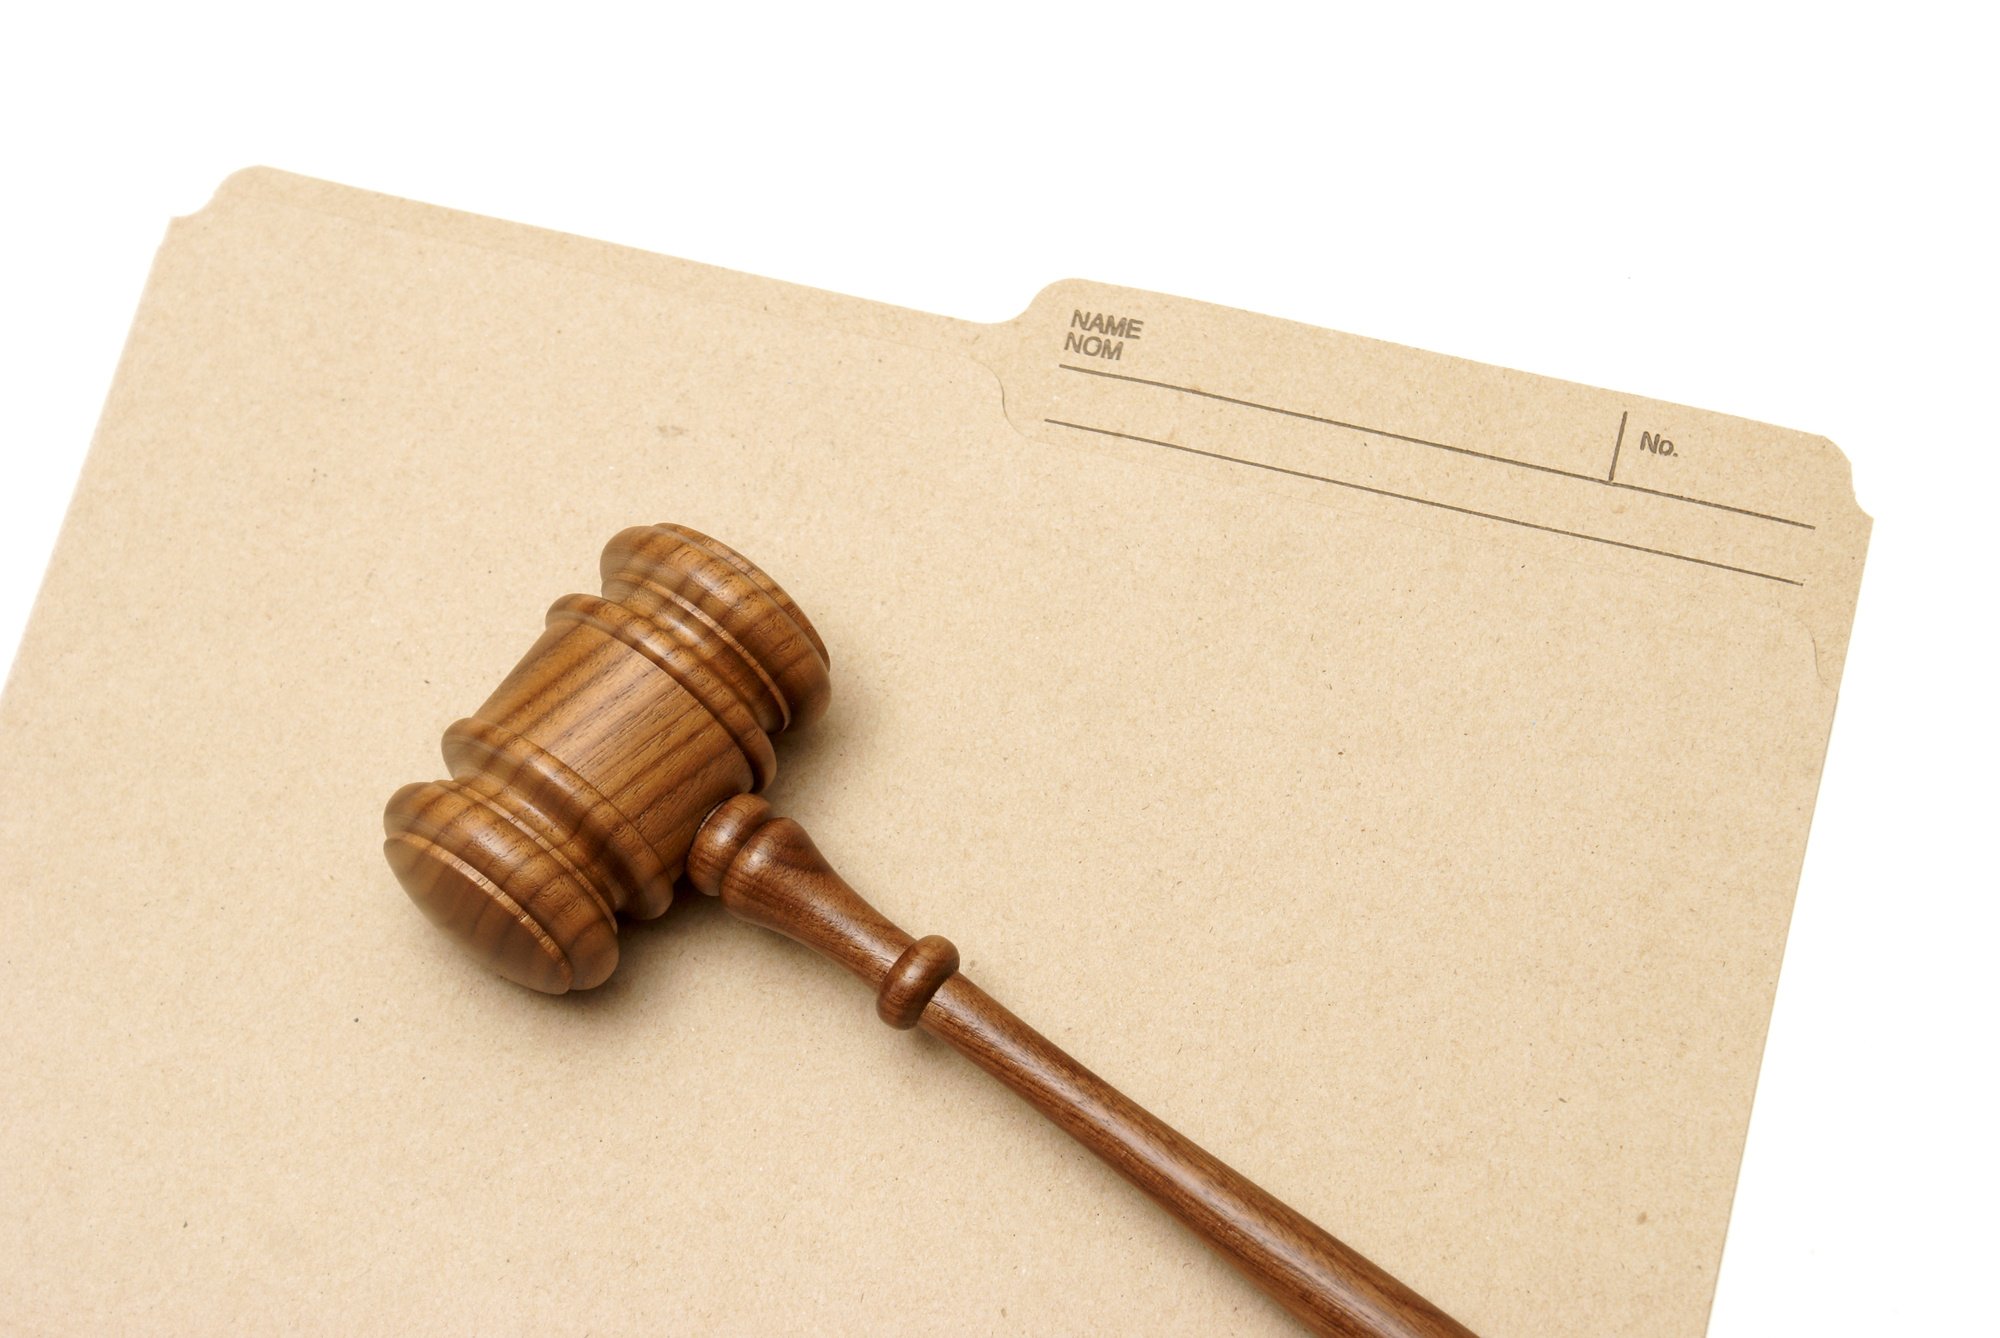 Should You Conduct a Tenant Criminal Background Check?